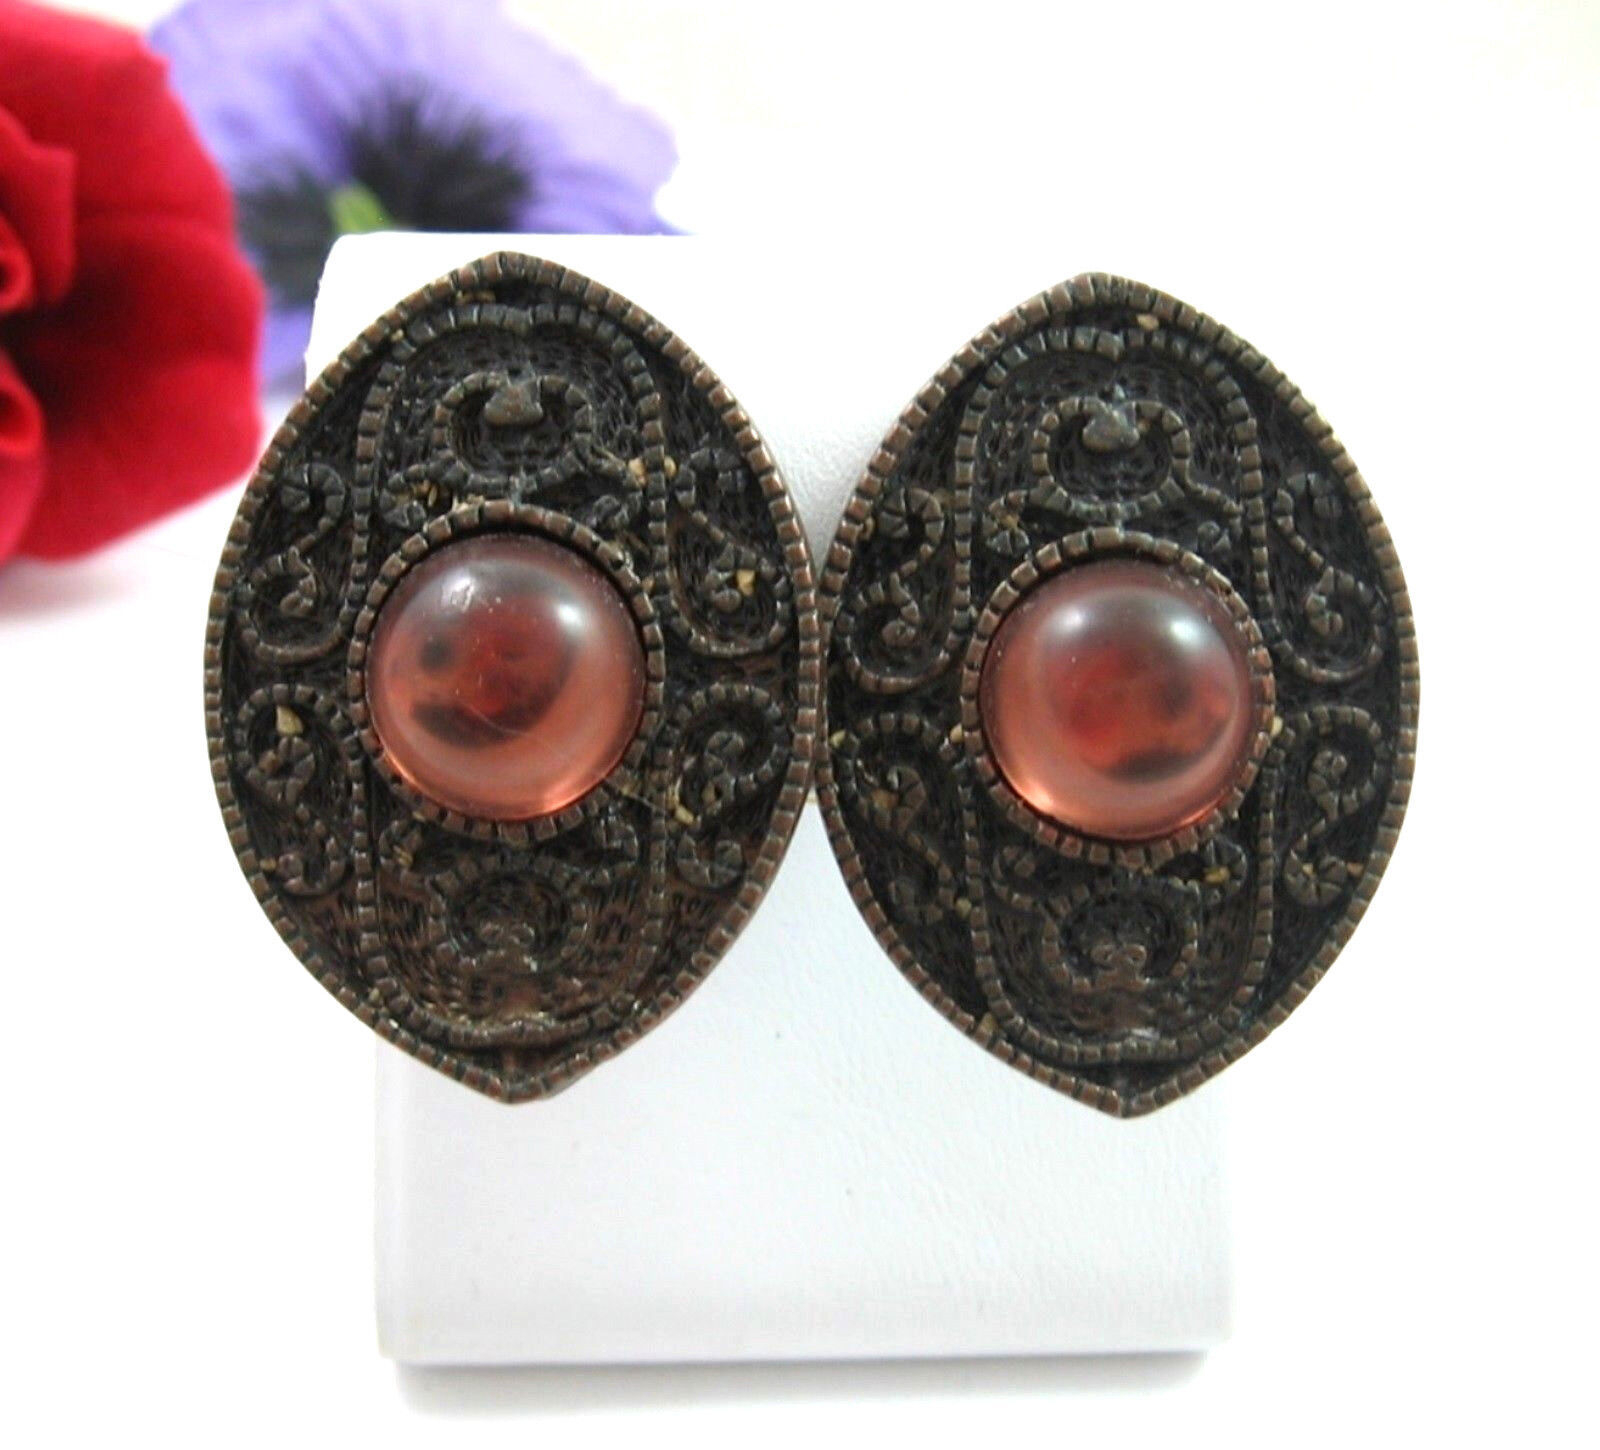 Primary image for DAUPLAISE CopperTone ROSE Cab Eye Clip On EARRINGS Vintage Designer Signed 1.5"